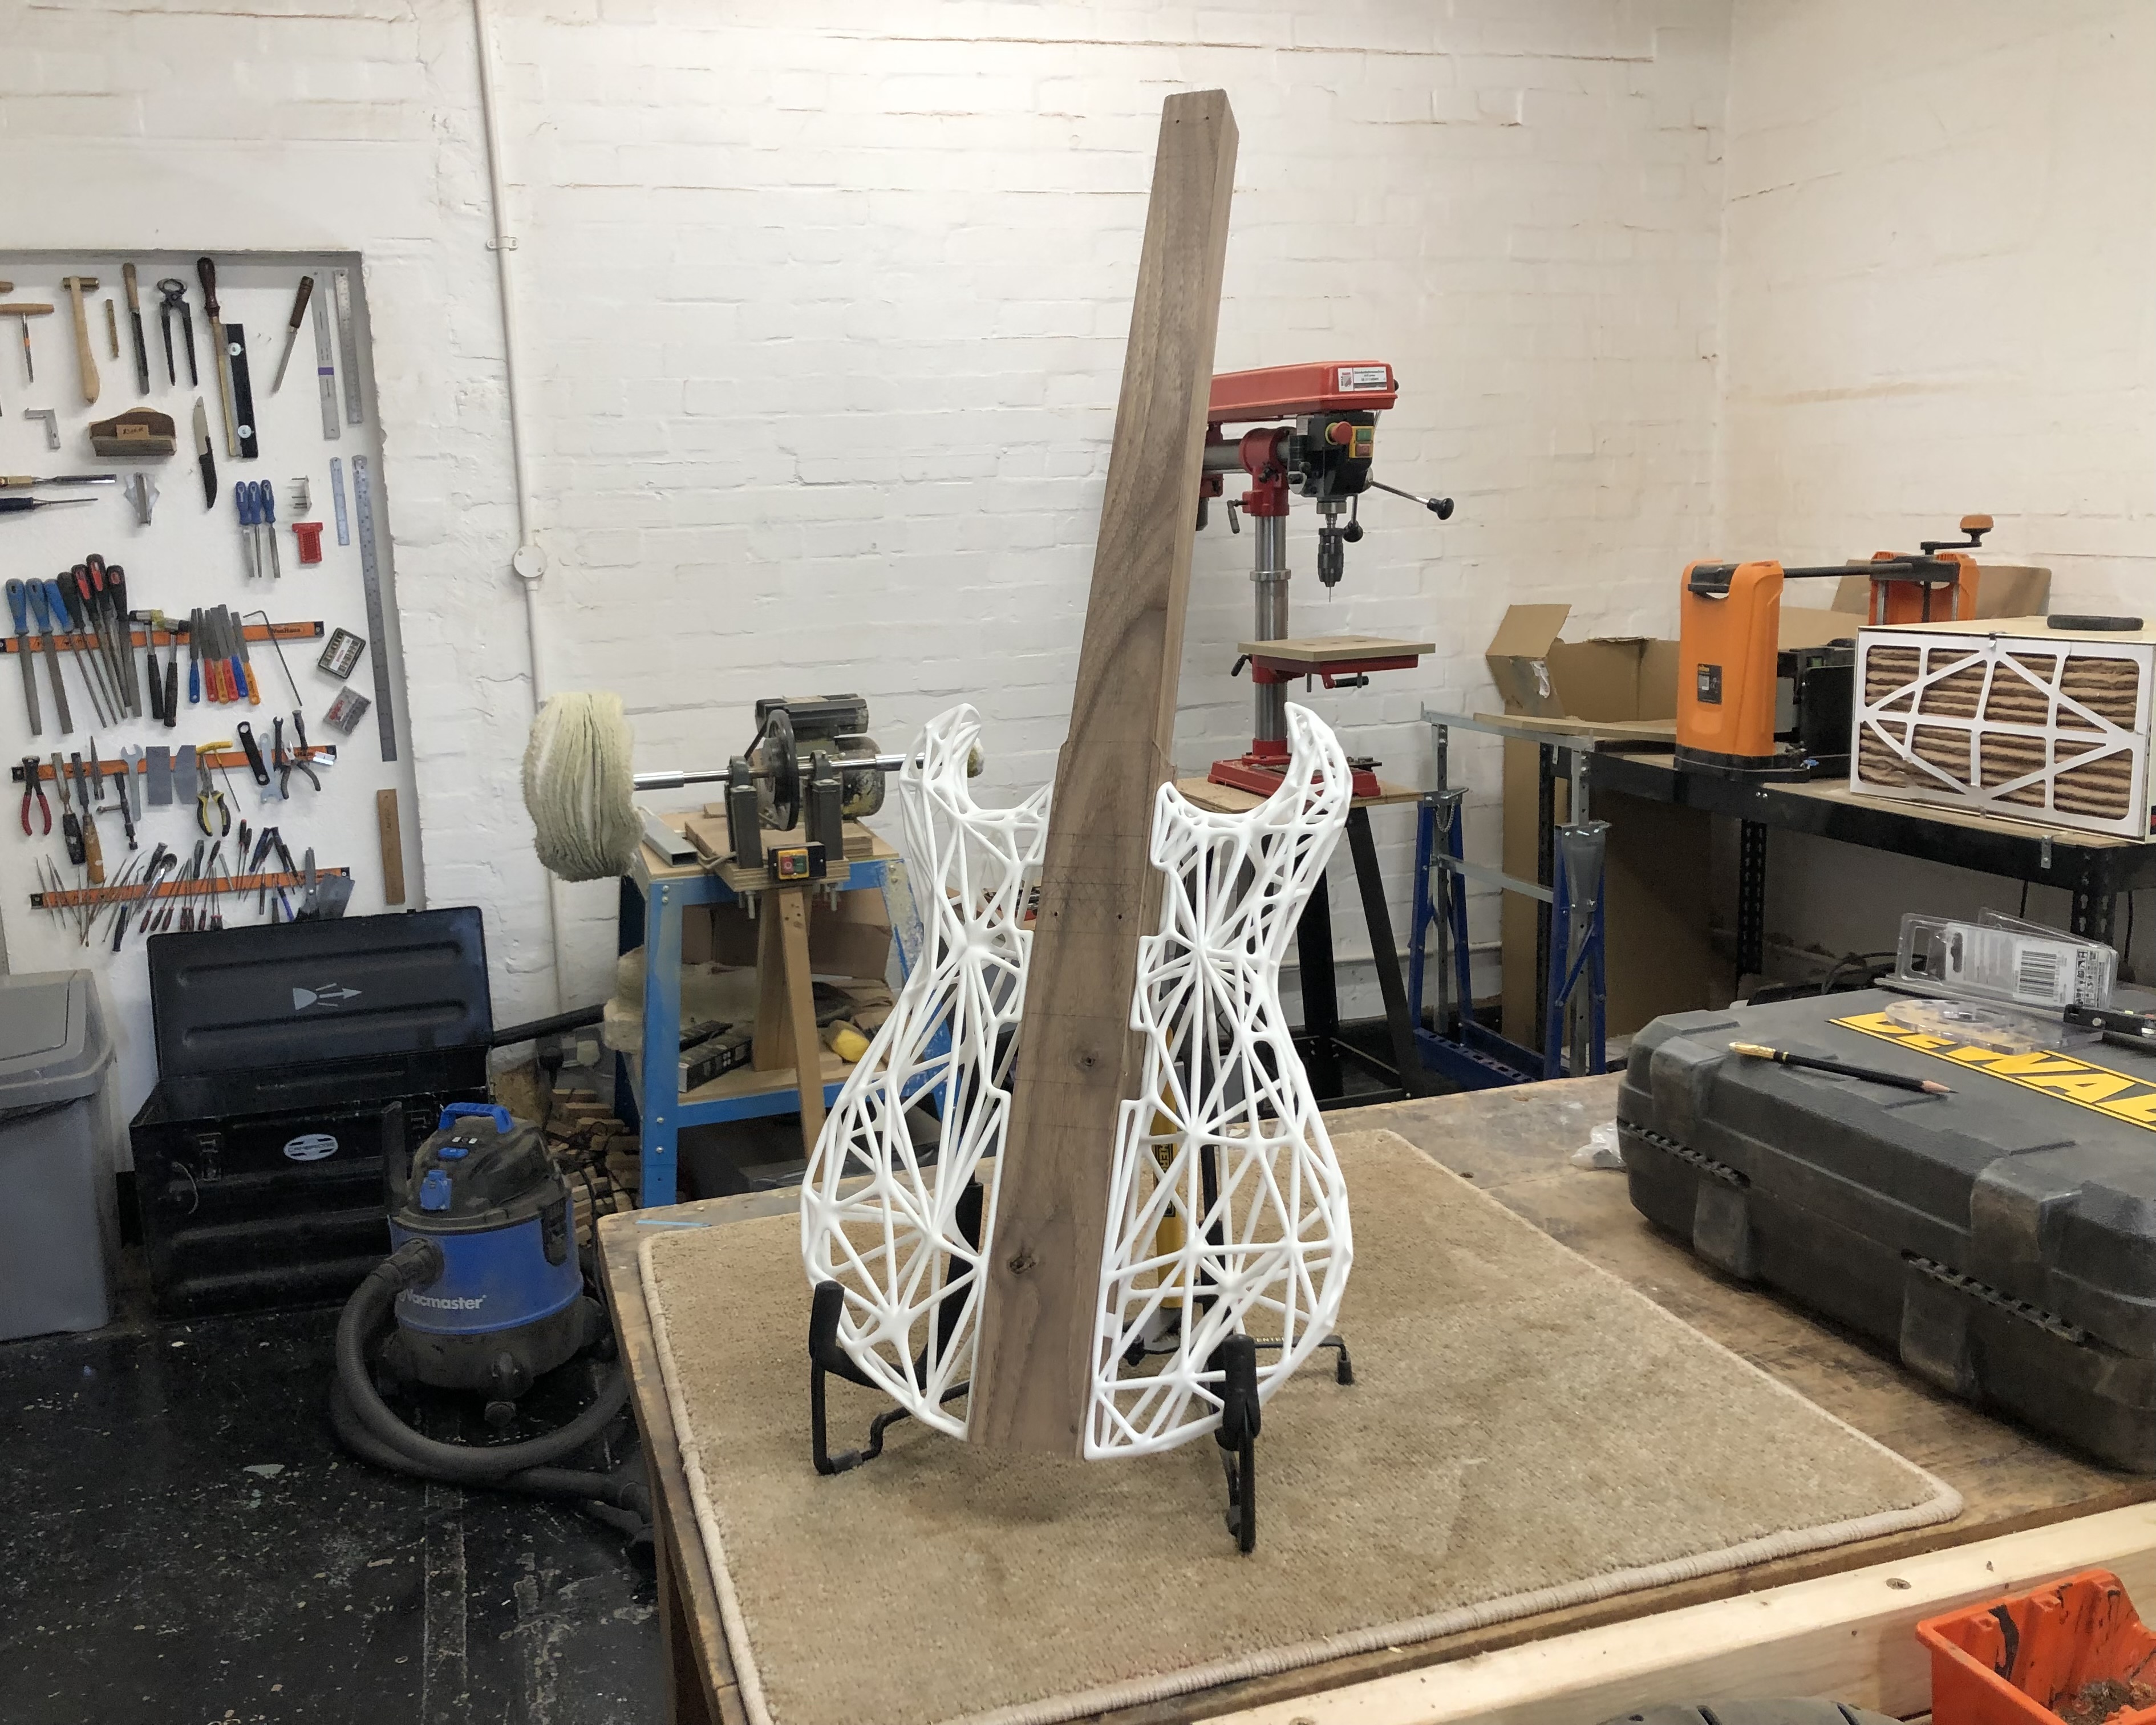 A photo of a weird in progress guitar on stand on a workbench. The centre of the guitar is a plank of walnut that runs the length of the body and neck, and to either side of it the body shape is made from a 3D-printed lattice in white plastic.